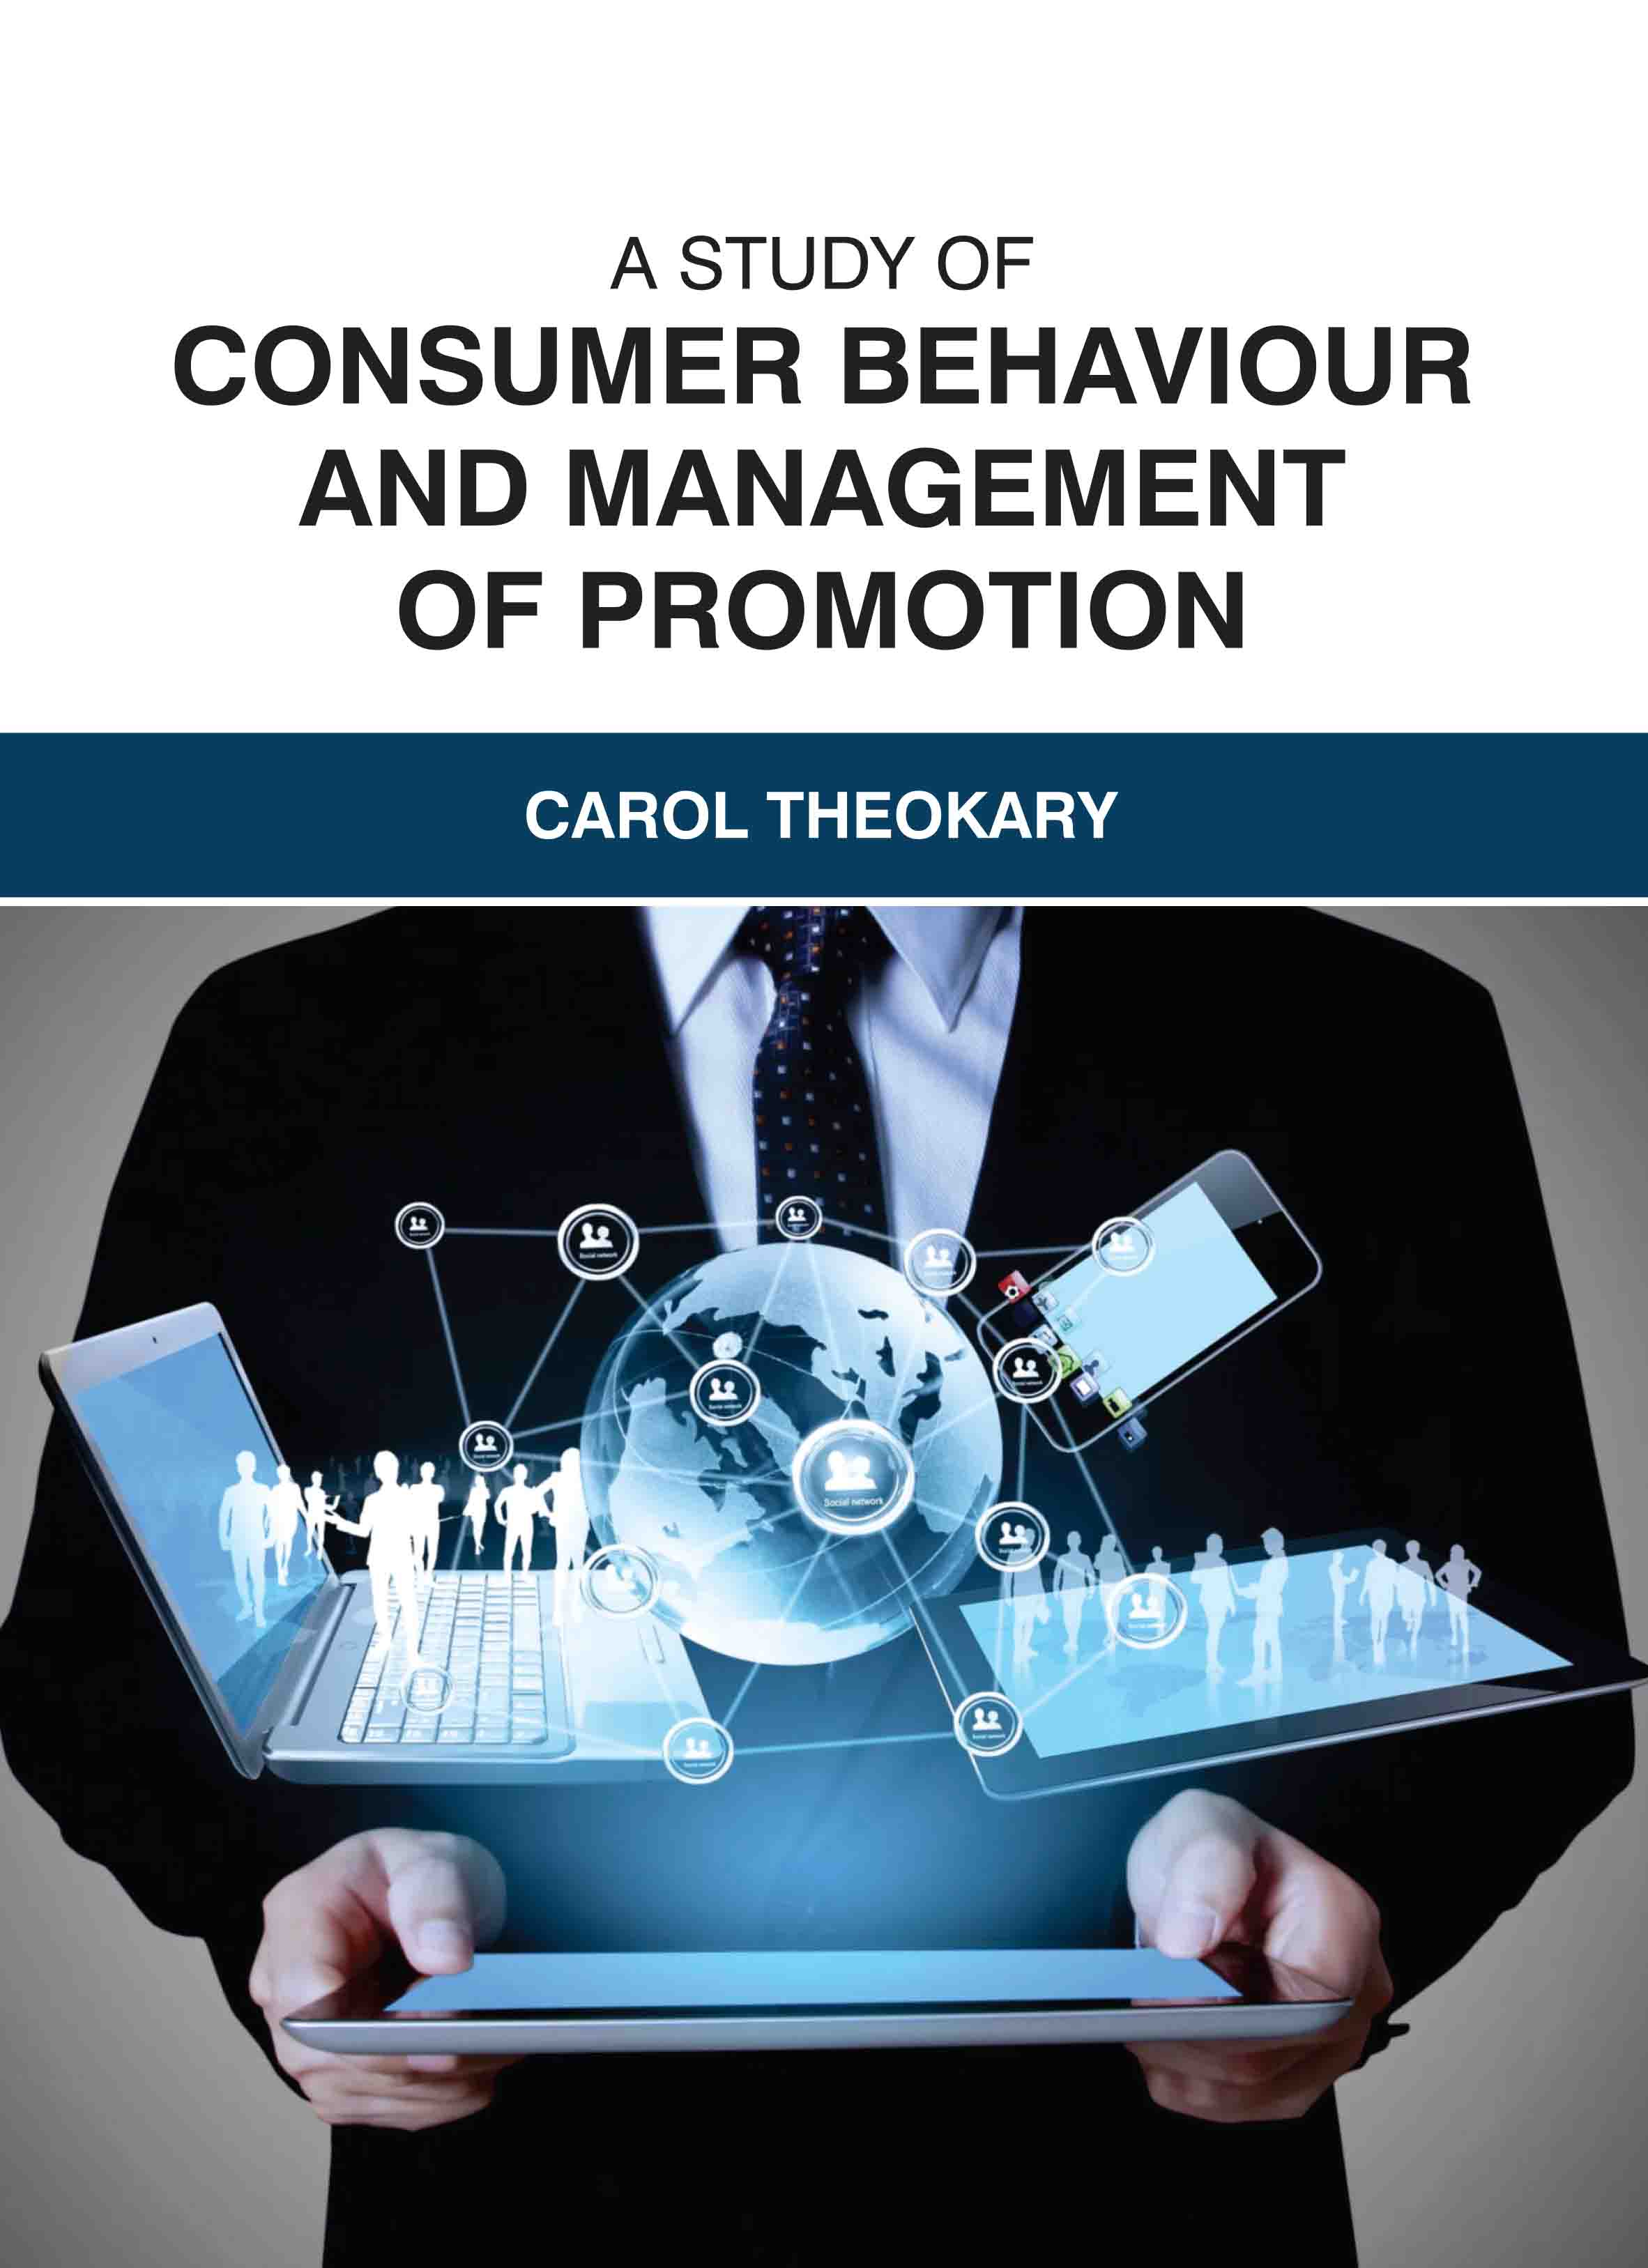 A Study of Consumer Behaviour and Management of Promotion